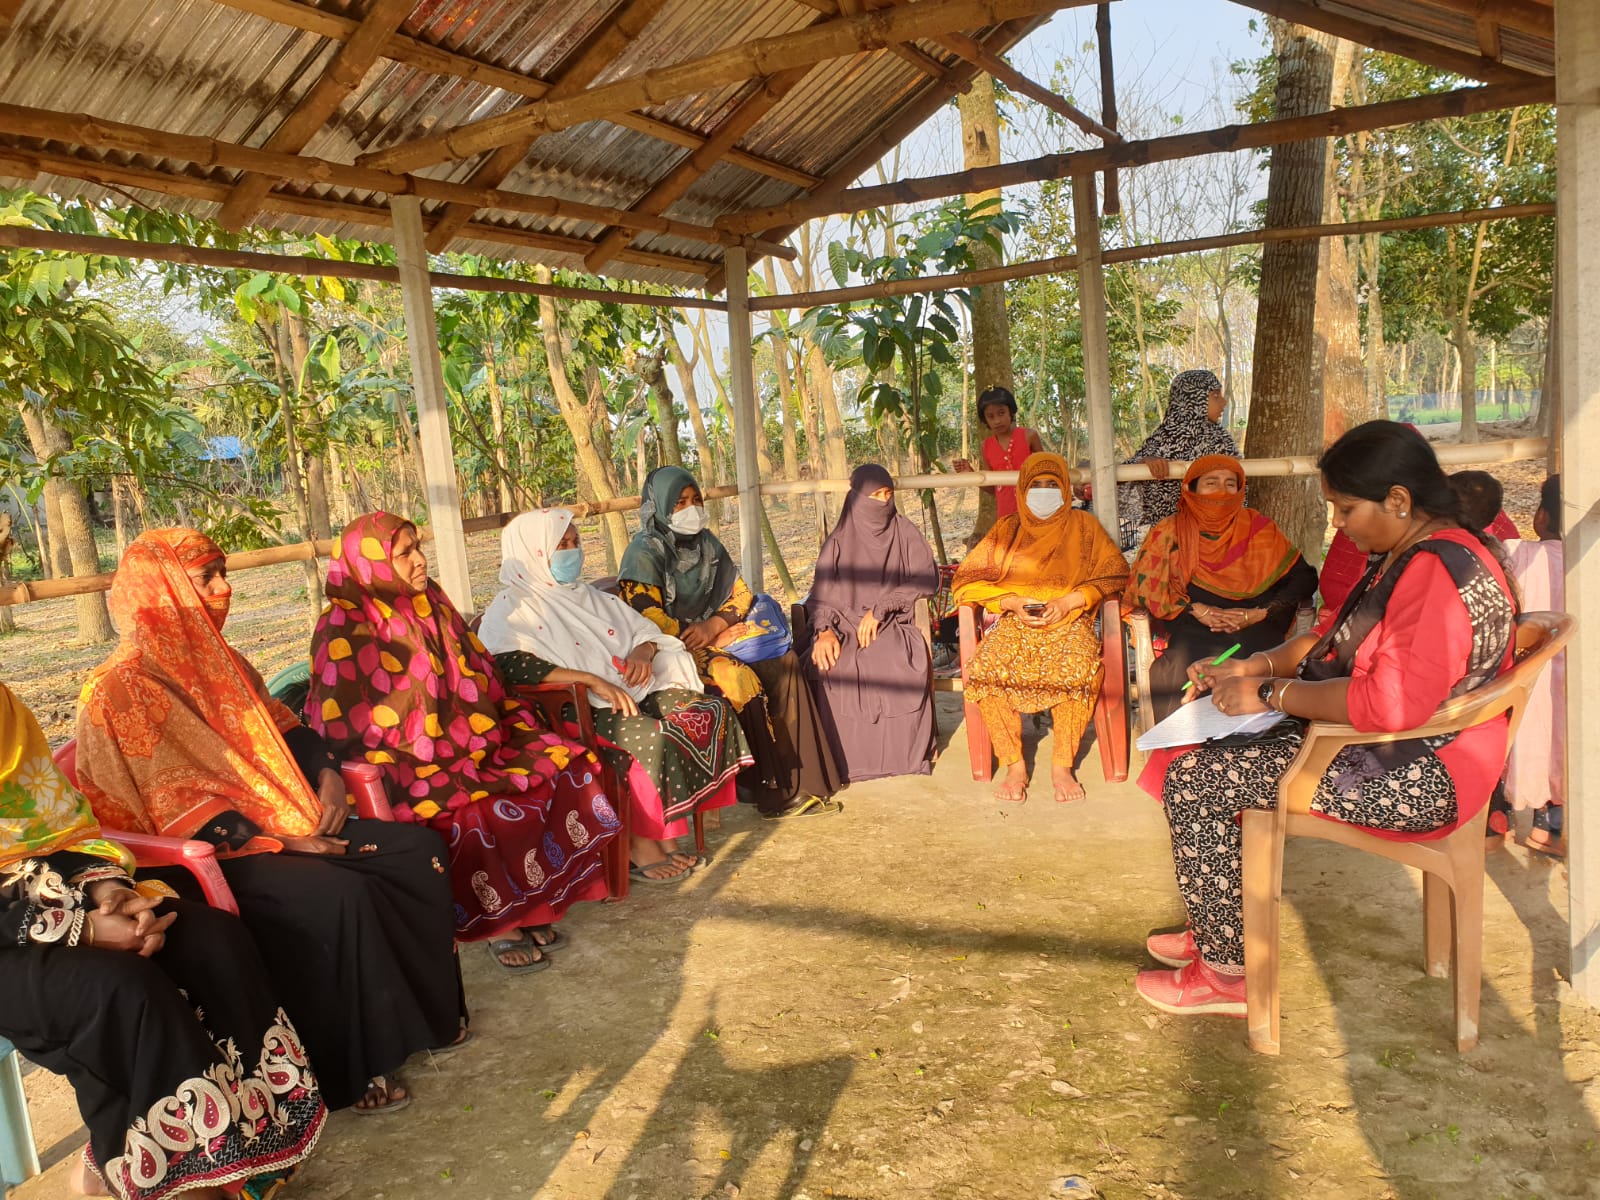 Bt eggplant nursery project to spur women’s empowerment in Bangladesh